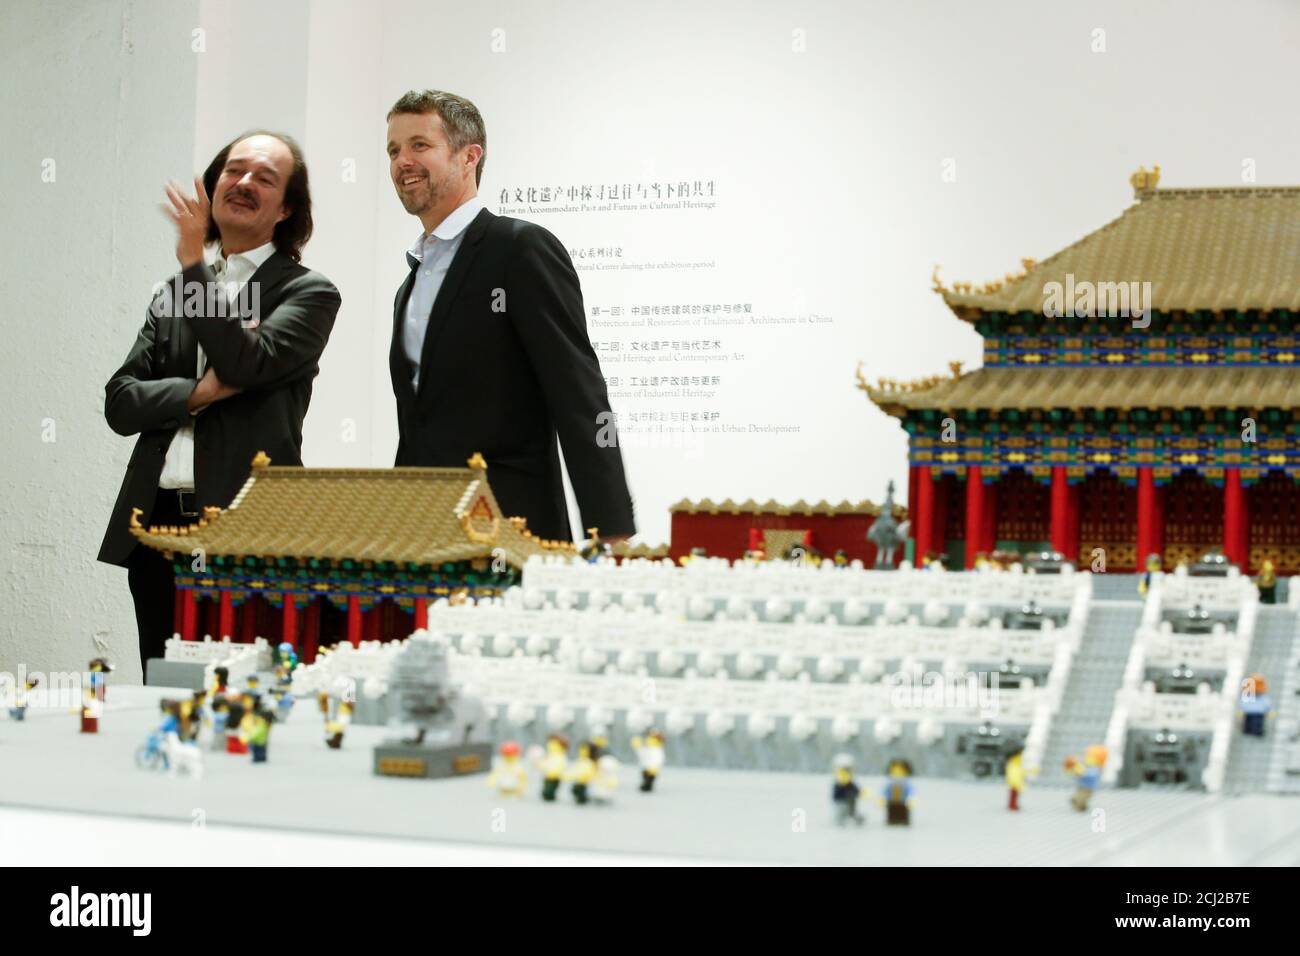 Danish Crown Prince Frederik and the head of the Danish Cultural Center Eric Messerschmidt stand next to a model of the Forbidden City made of Lego bricks in the Danish Cultural Center at the 798 art district in Beijing, China, September 23, 2017.   REUTERS/Thomas Peter Stock Photo